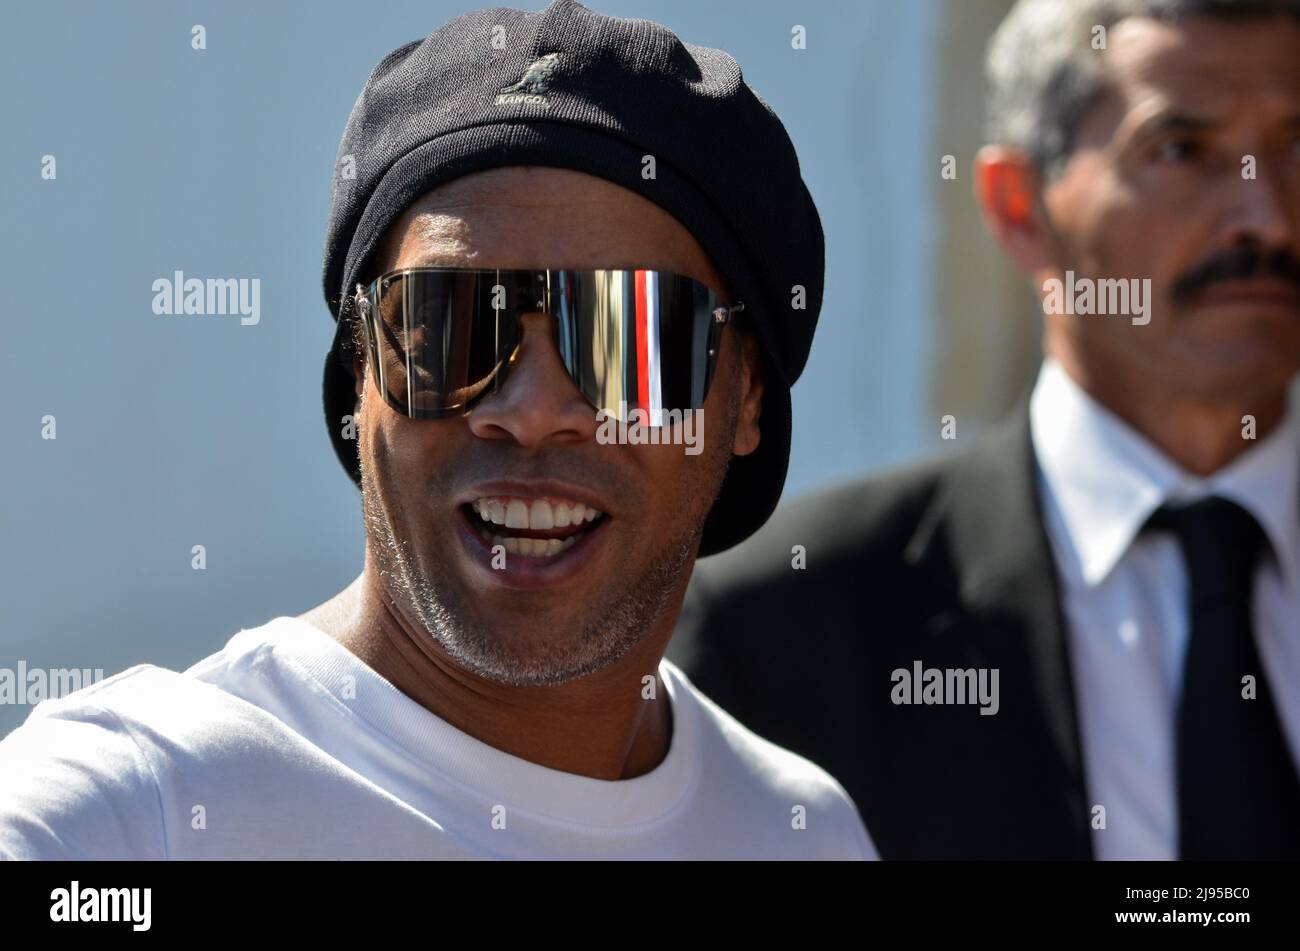 Tunis, Tunisia. 20th May, 2022. May 20, 2022, Sidi Bou Said, Tunis governorate, Tunisia: Tunis, Tunisia. 20 May 2022: Brazilian retired professional footballer Ronaldinho arrives at the Tunisian northern town of Sidi Bou Said on a visit to the country. Ronaldo de Assis Moreira, commonly known as Ronaldinho GaÃºcho, walked in the alleys of the picturesque tourist town accompanied by Tunisian officials (Credit Image: © Hasan Mrad/IMAGESLIVE via ZUMA Press Wire) Credit: ZUMA Press, Inc./Alamy Live News Stock Photo